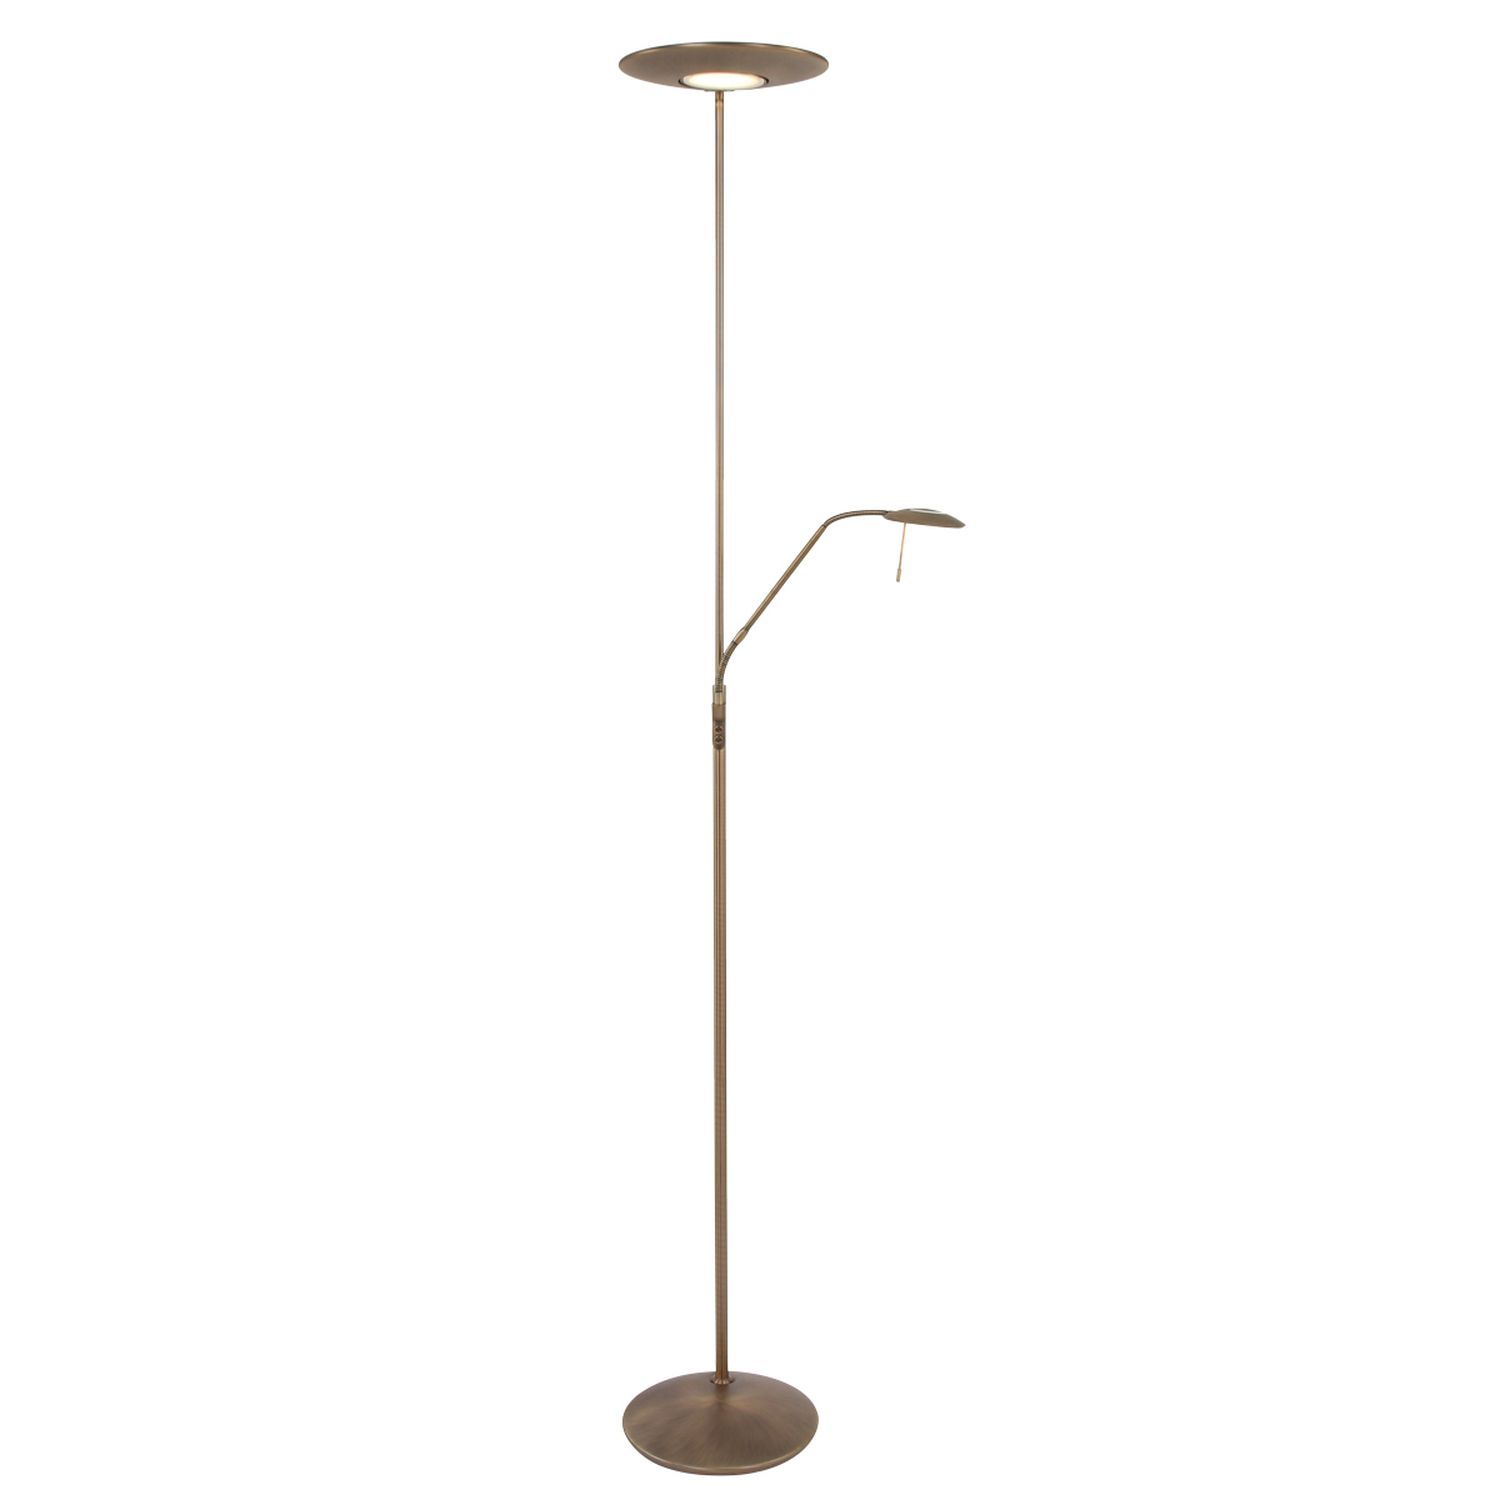 Dimmbarer LED Deckenfluter mit Lesearm in Bronze 185 cm